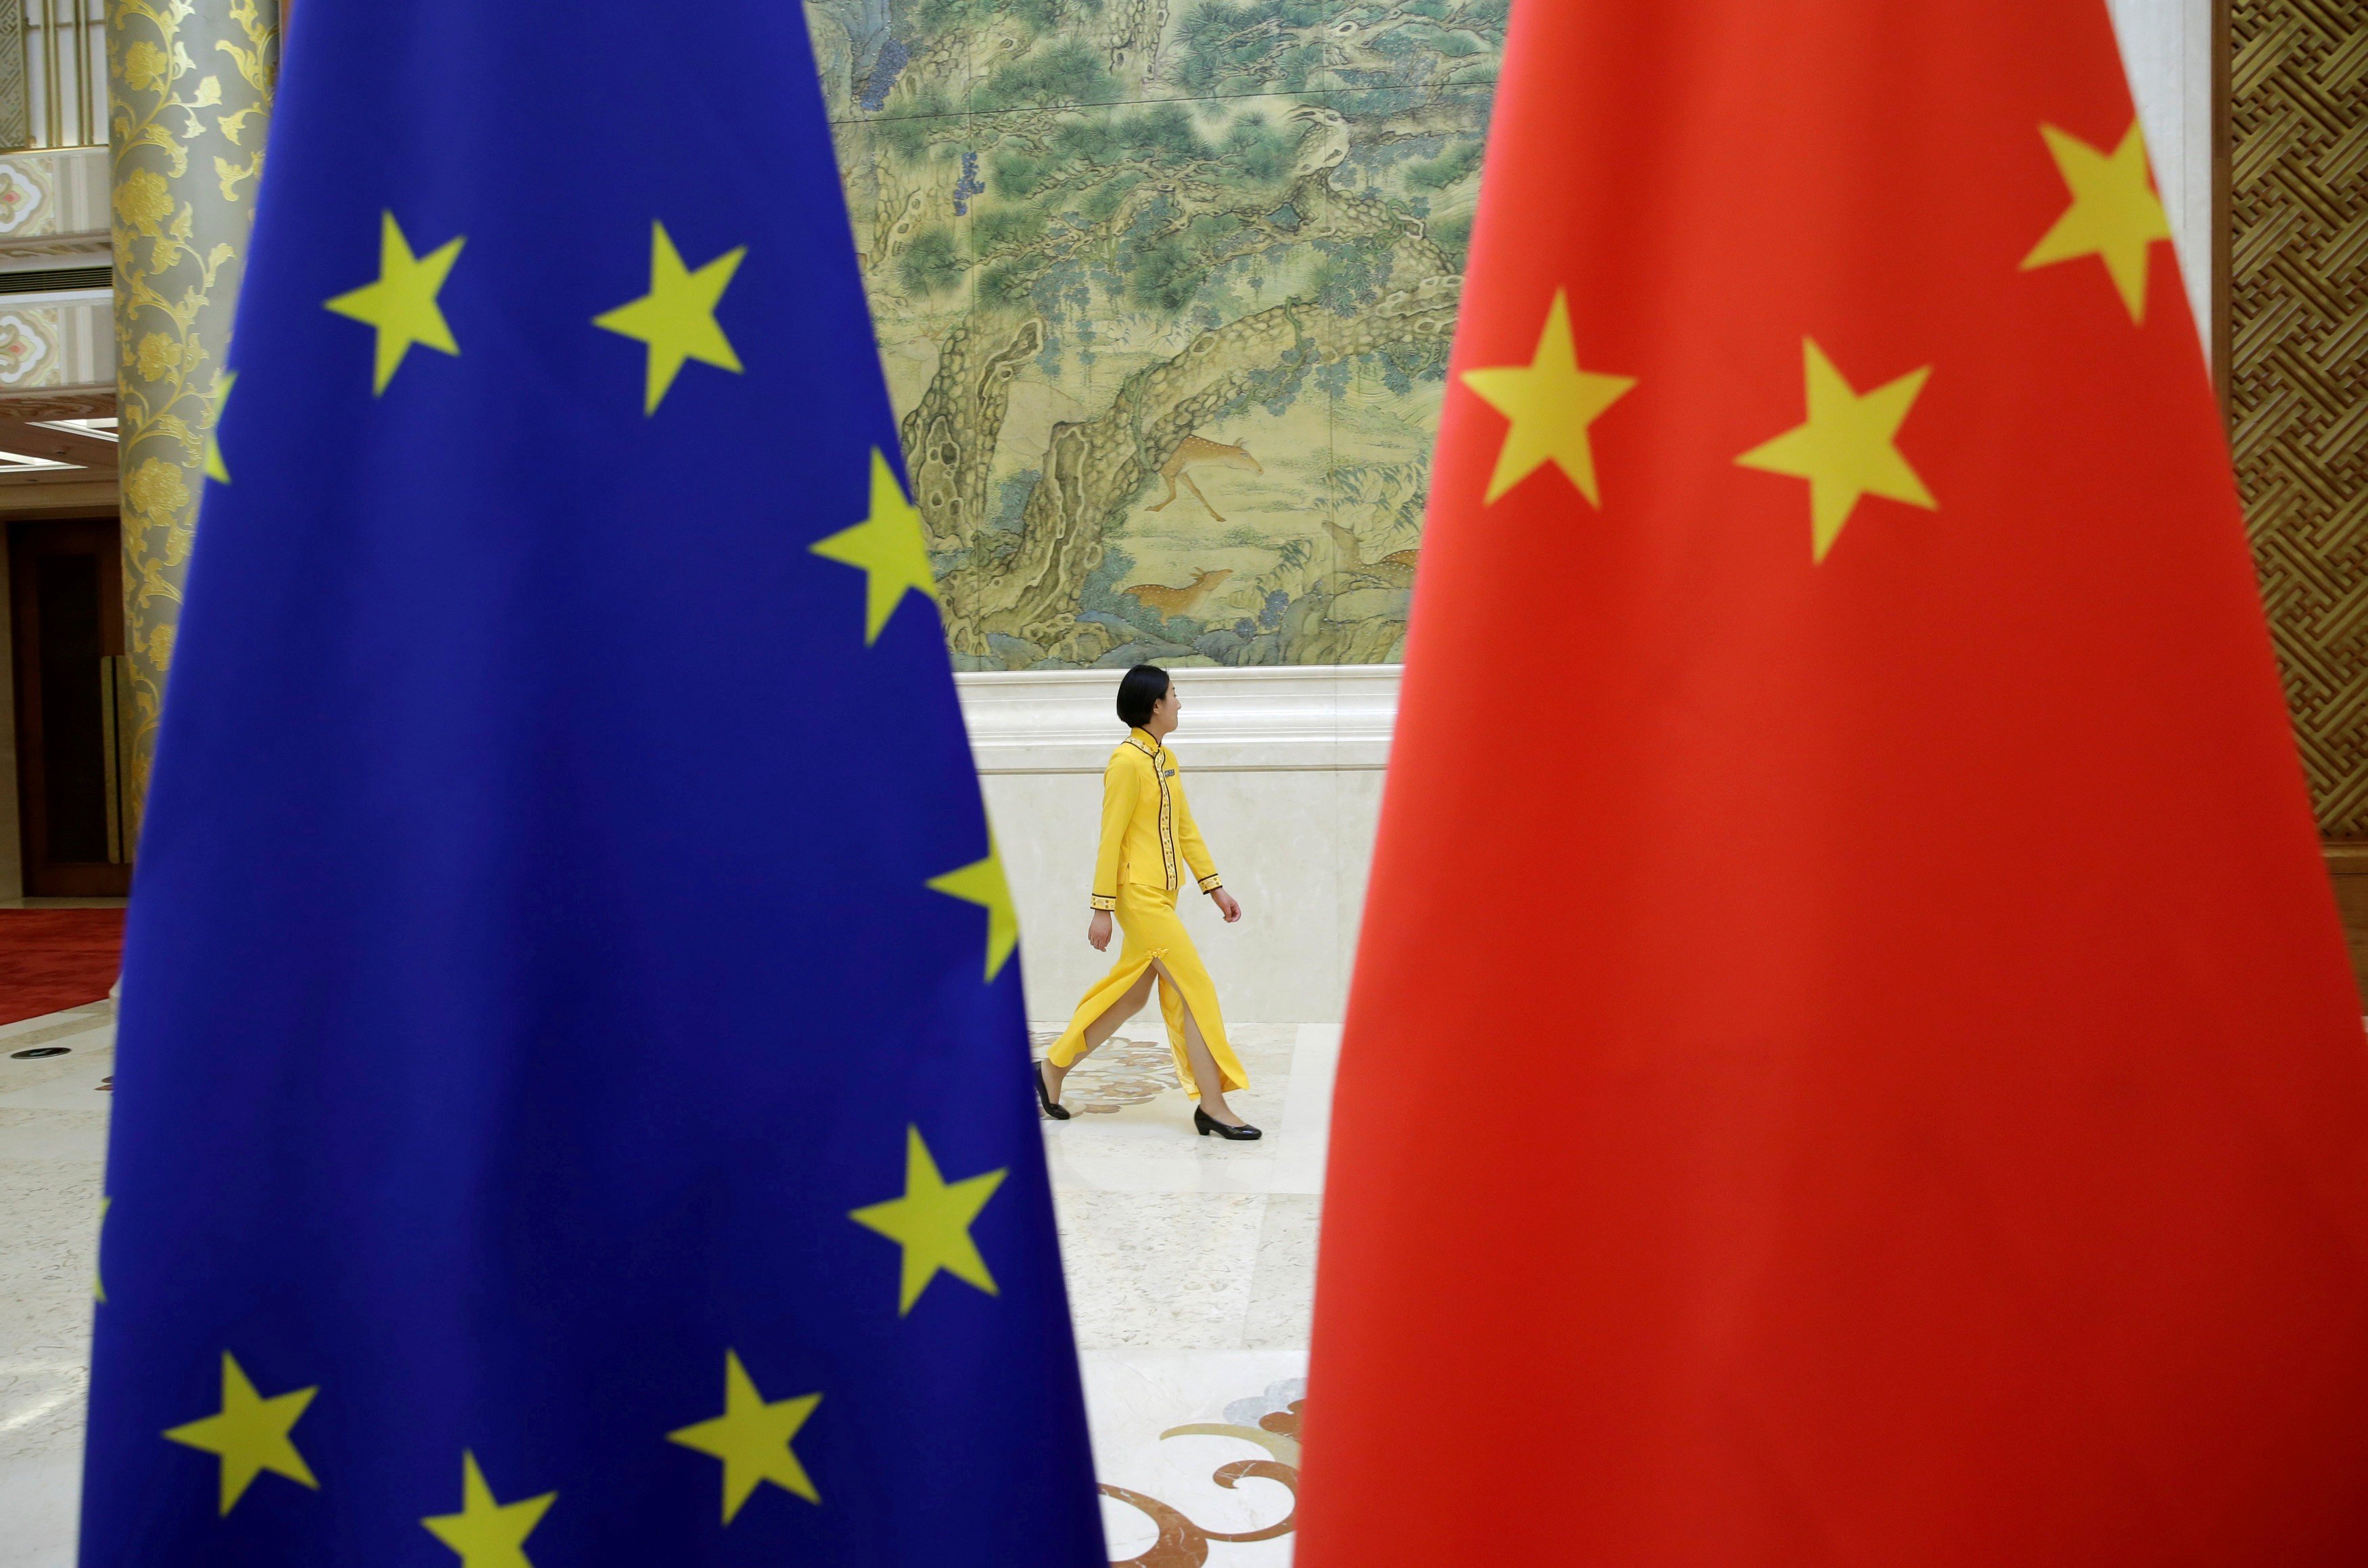 European Union members are expected to raise China’s “unfair trade practices” at a summit in Brussels on Tuesday. Photo: Reuters